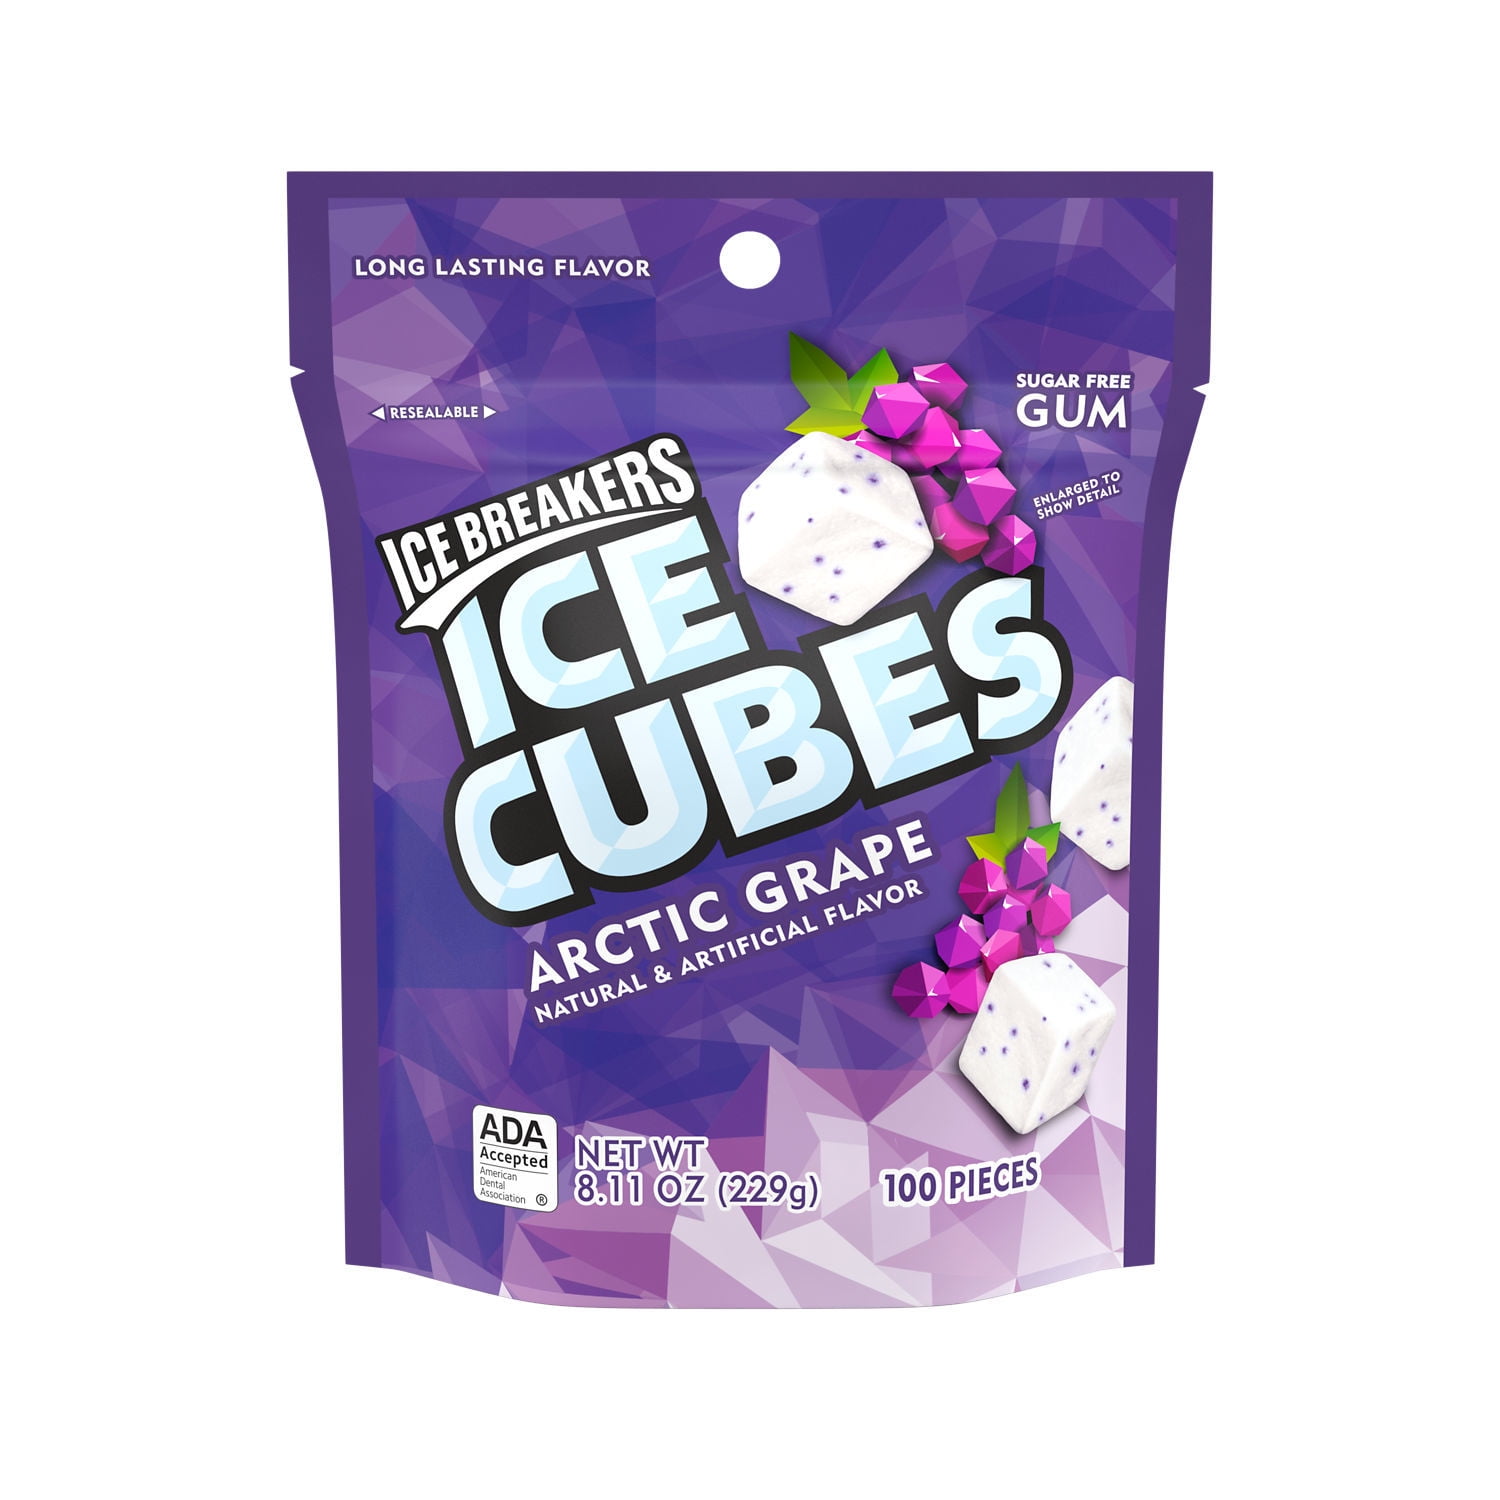 ICE BREAKERS ICE CUBES ARCTIC GRAPE Fruity, Made with Xylitol Sugar Free Chewing Gum Pouch, 8.11 oz (100 Pieces)